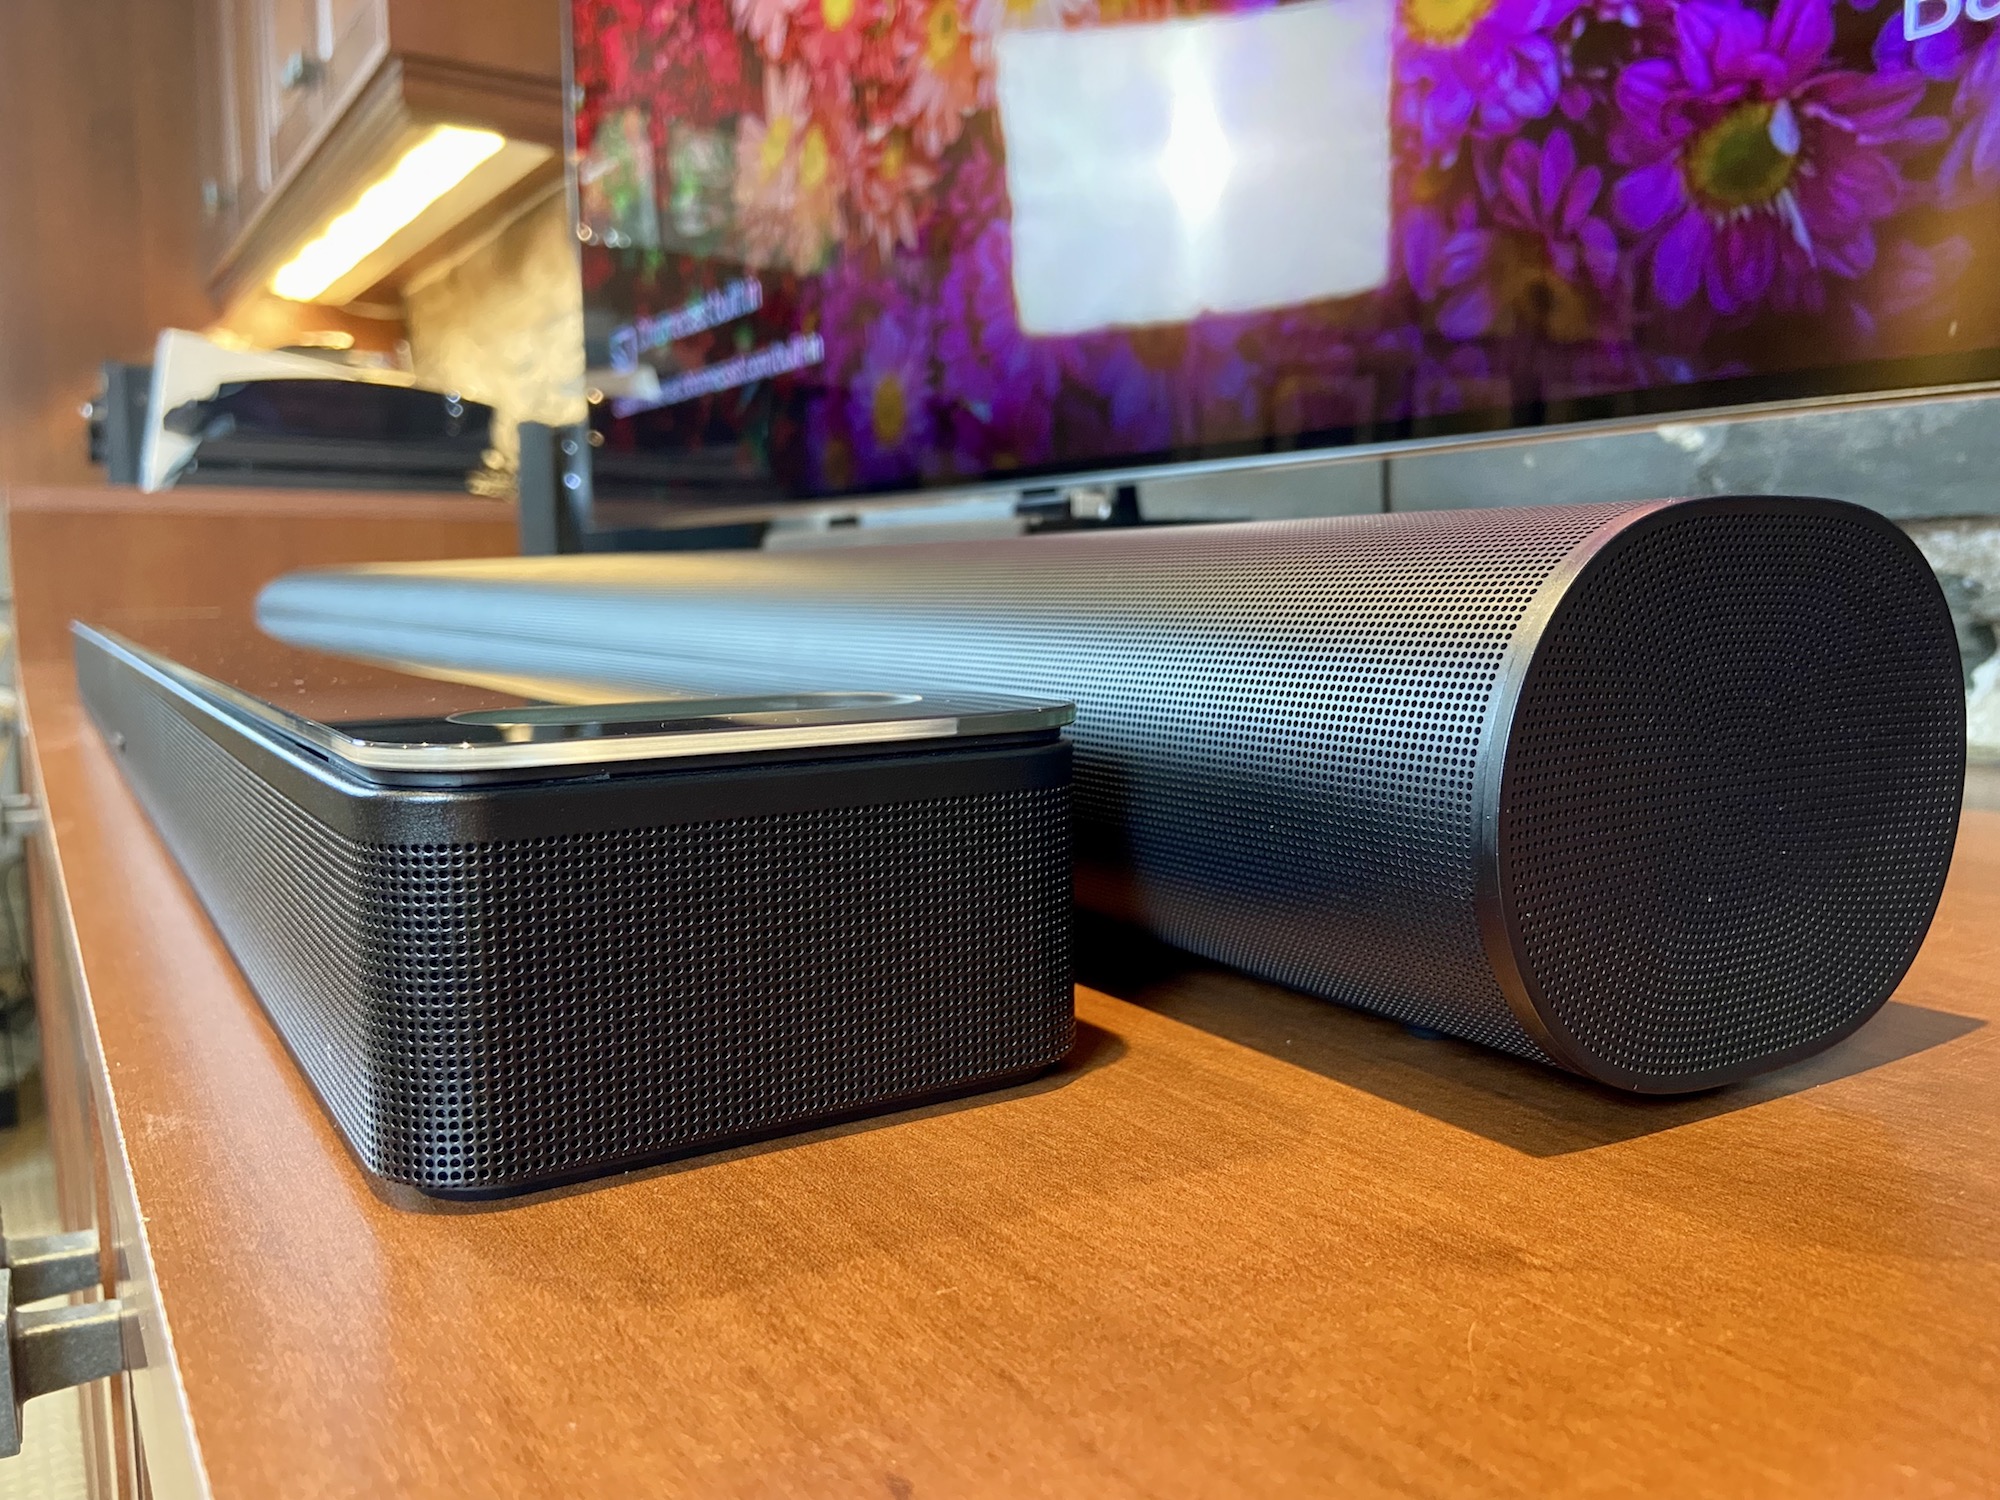 Bose Smart Soundbar 900 review: Atmos adds to the immersion 